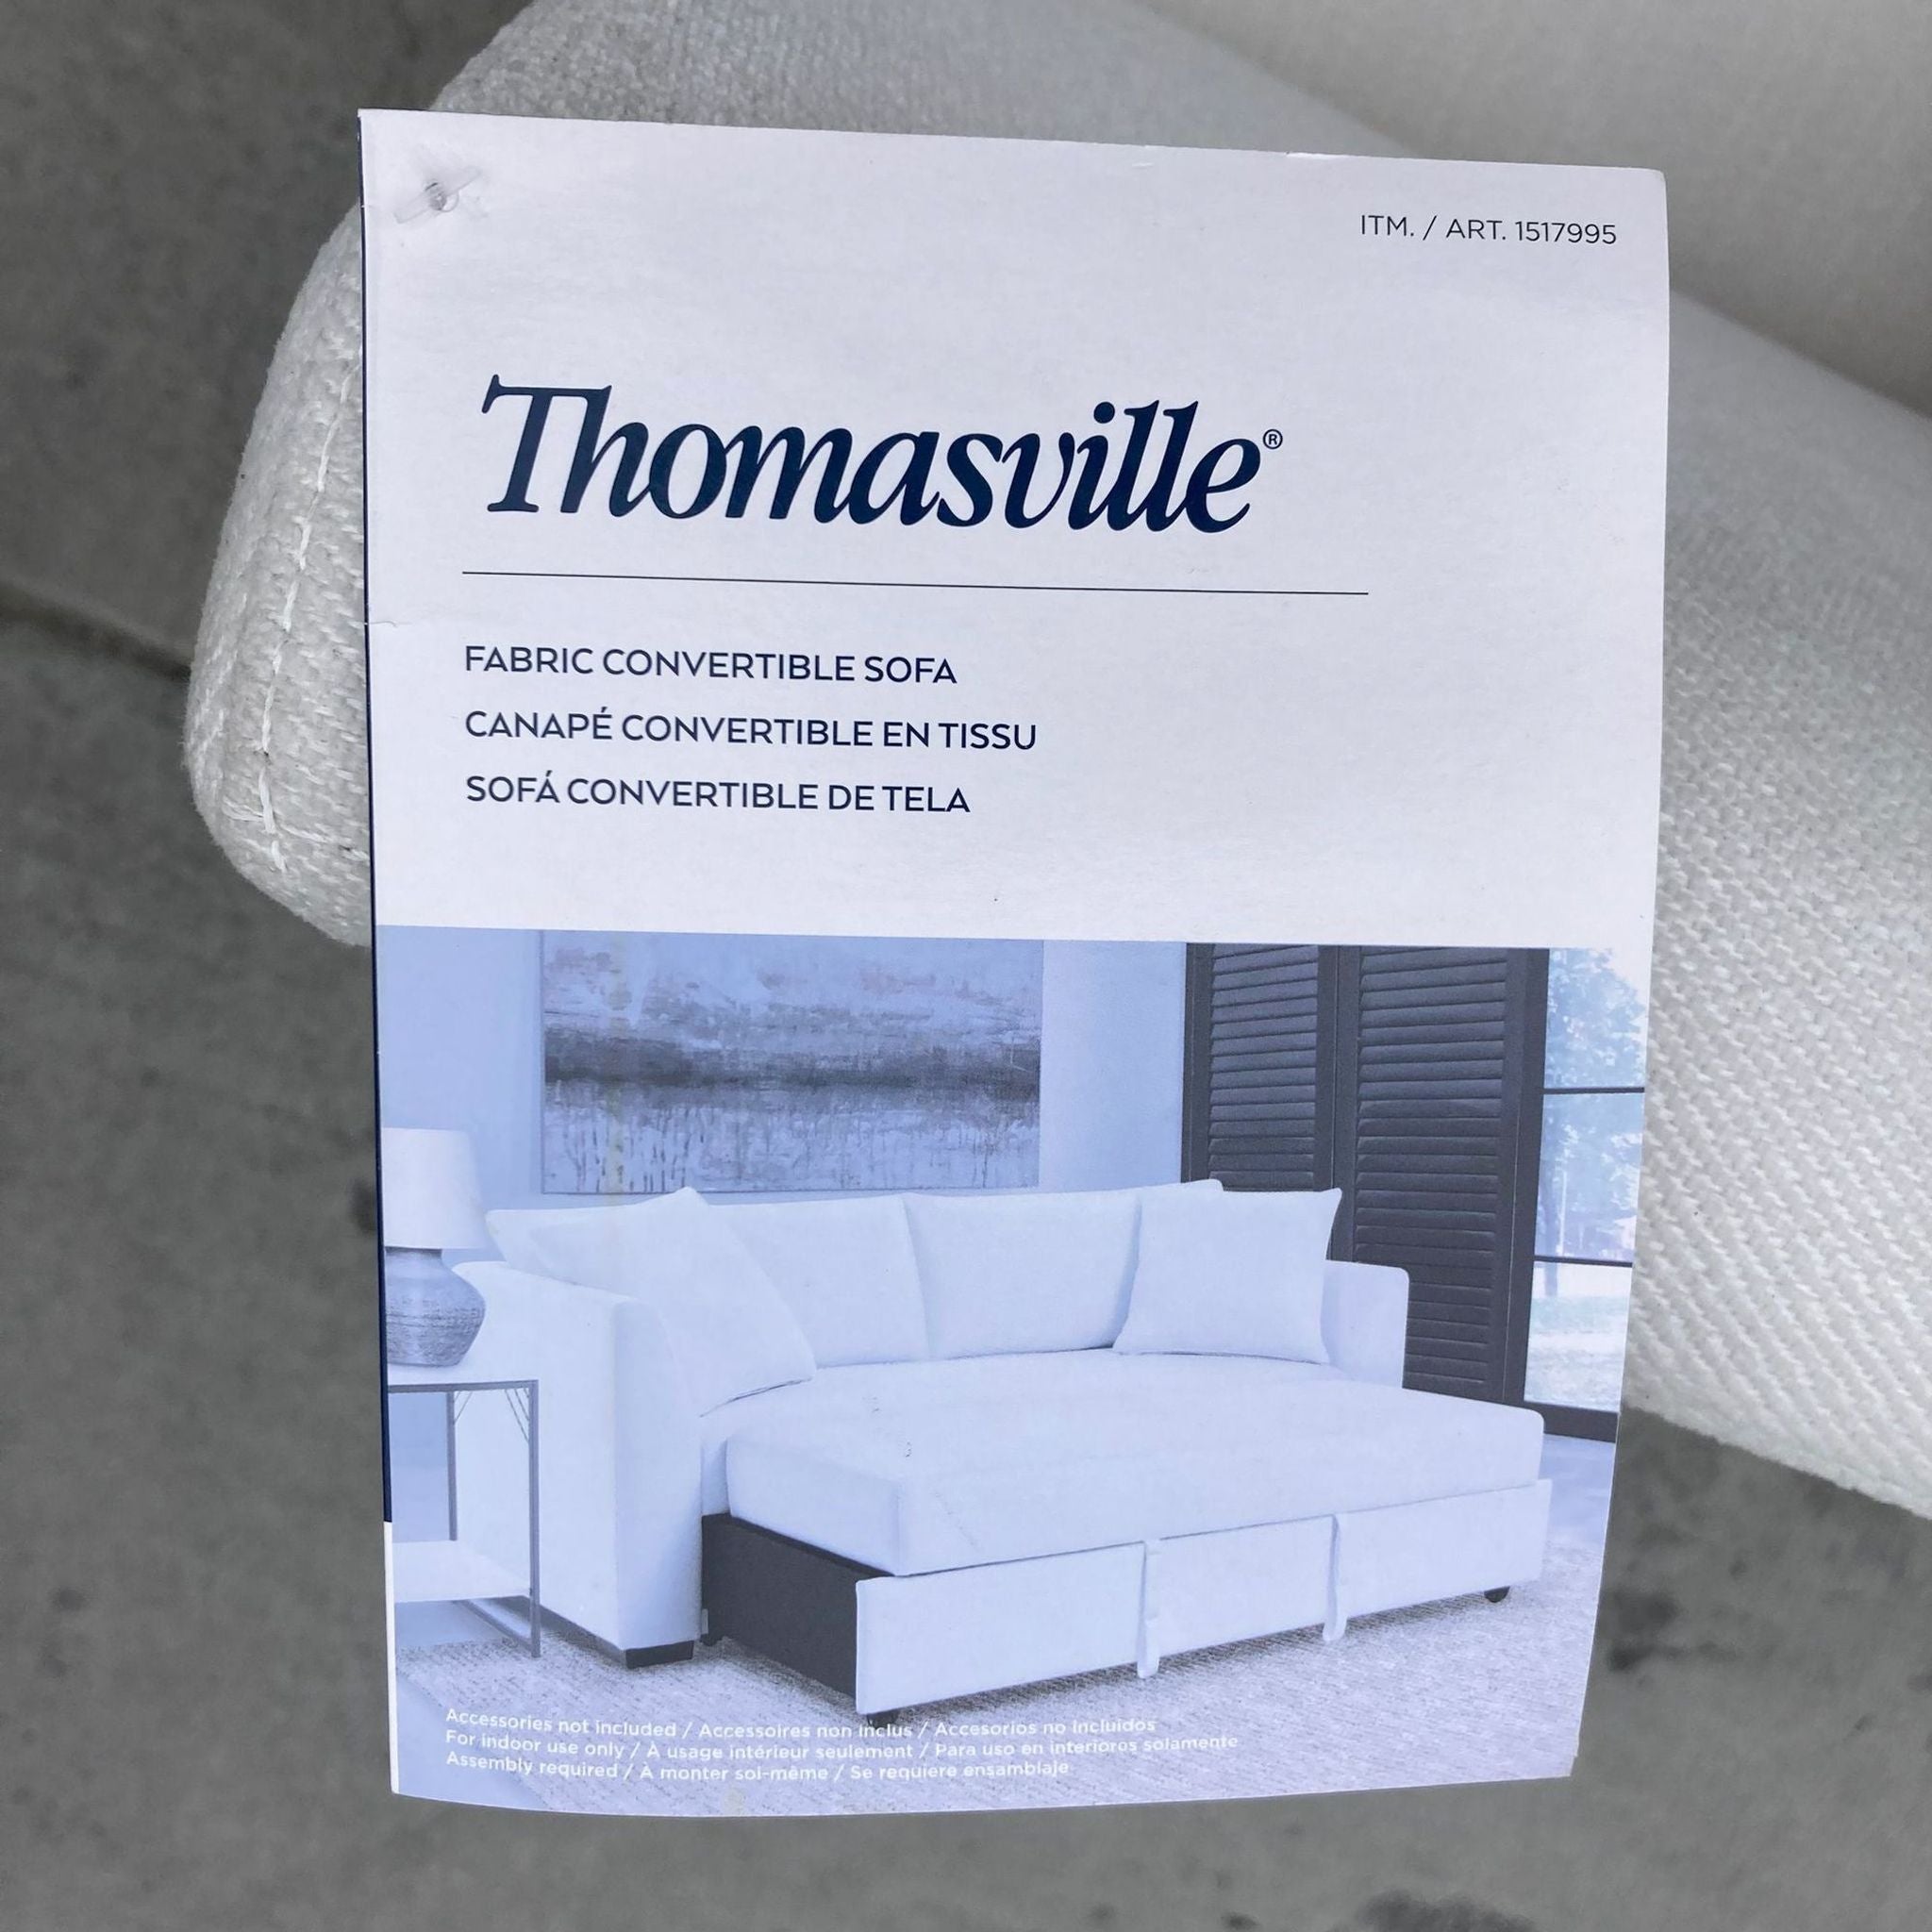 Close-up of a Thomasville tag on a fabric convertible sofa with product details.